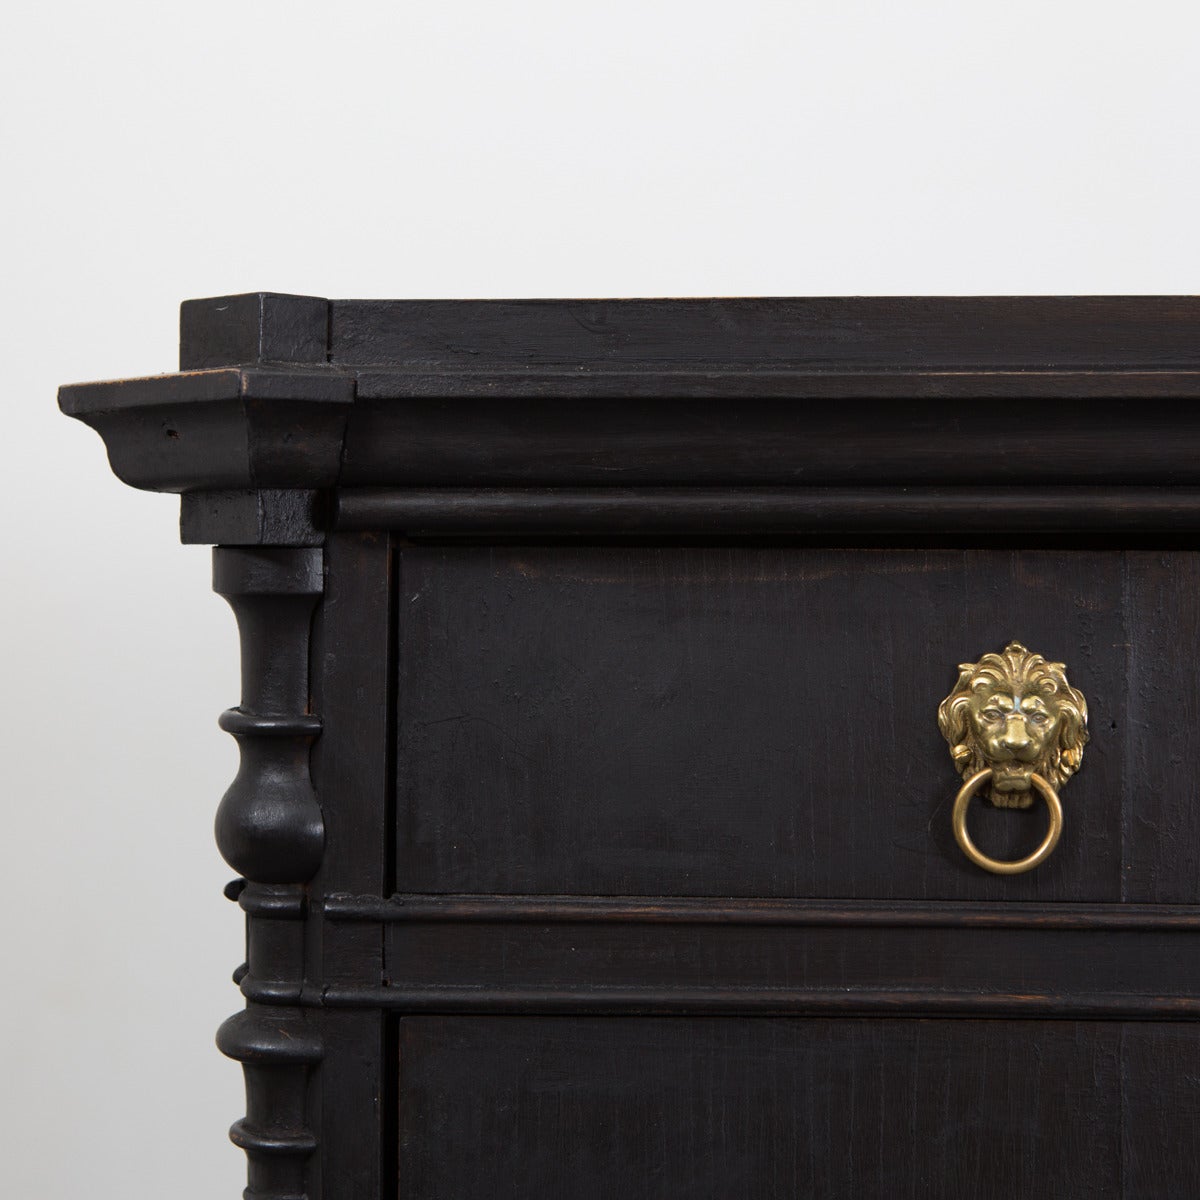 A black painted chest of drawers made during the Karl Johan period 1820-1850 in Sweden. Later paint job and hardware.